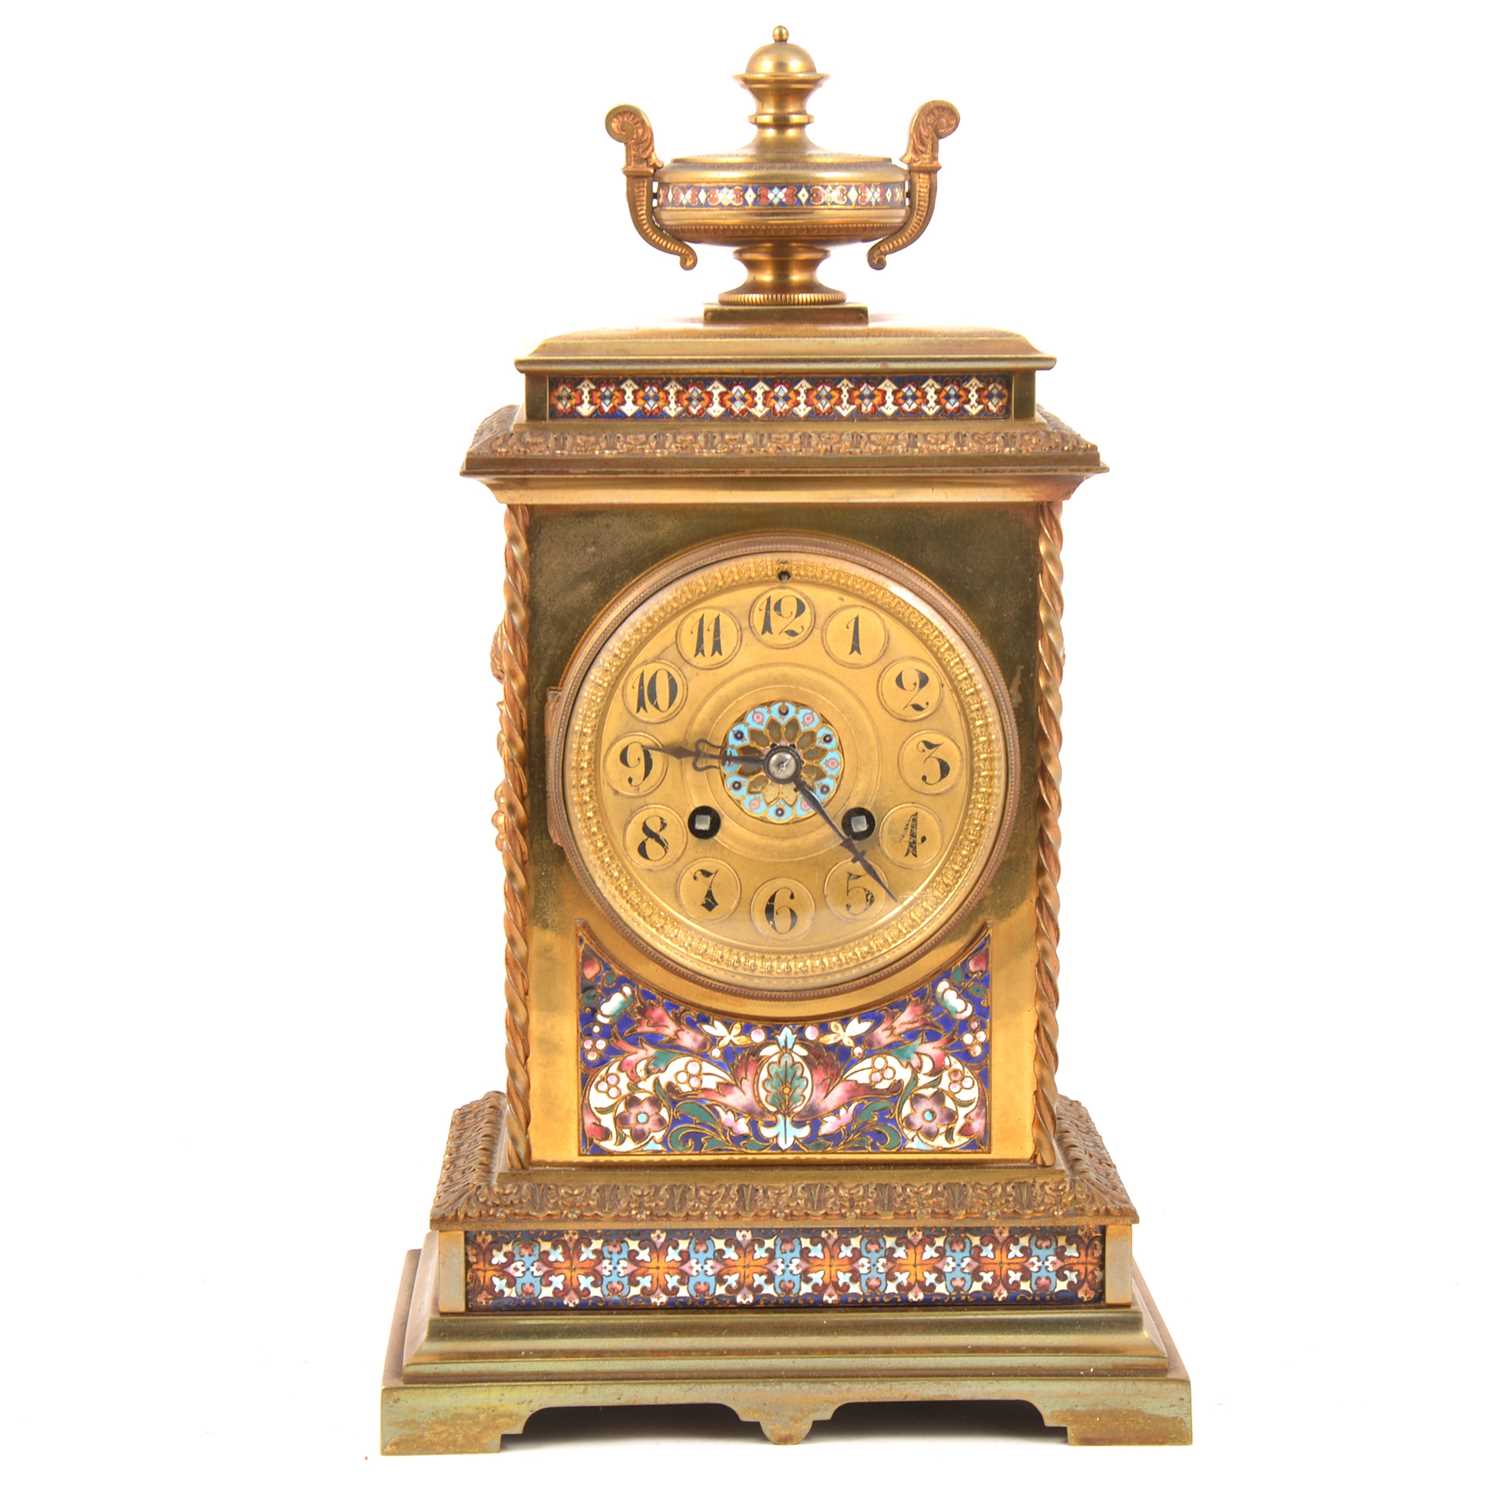 Lot 115 - A 19th Century French brass and champleve enamel mantel clock.